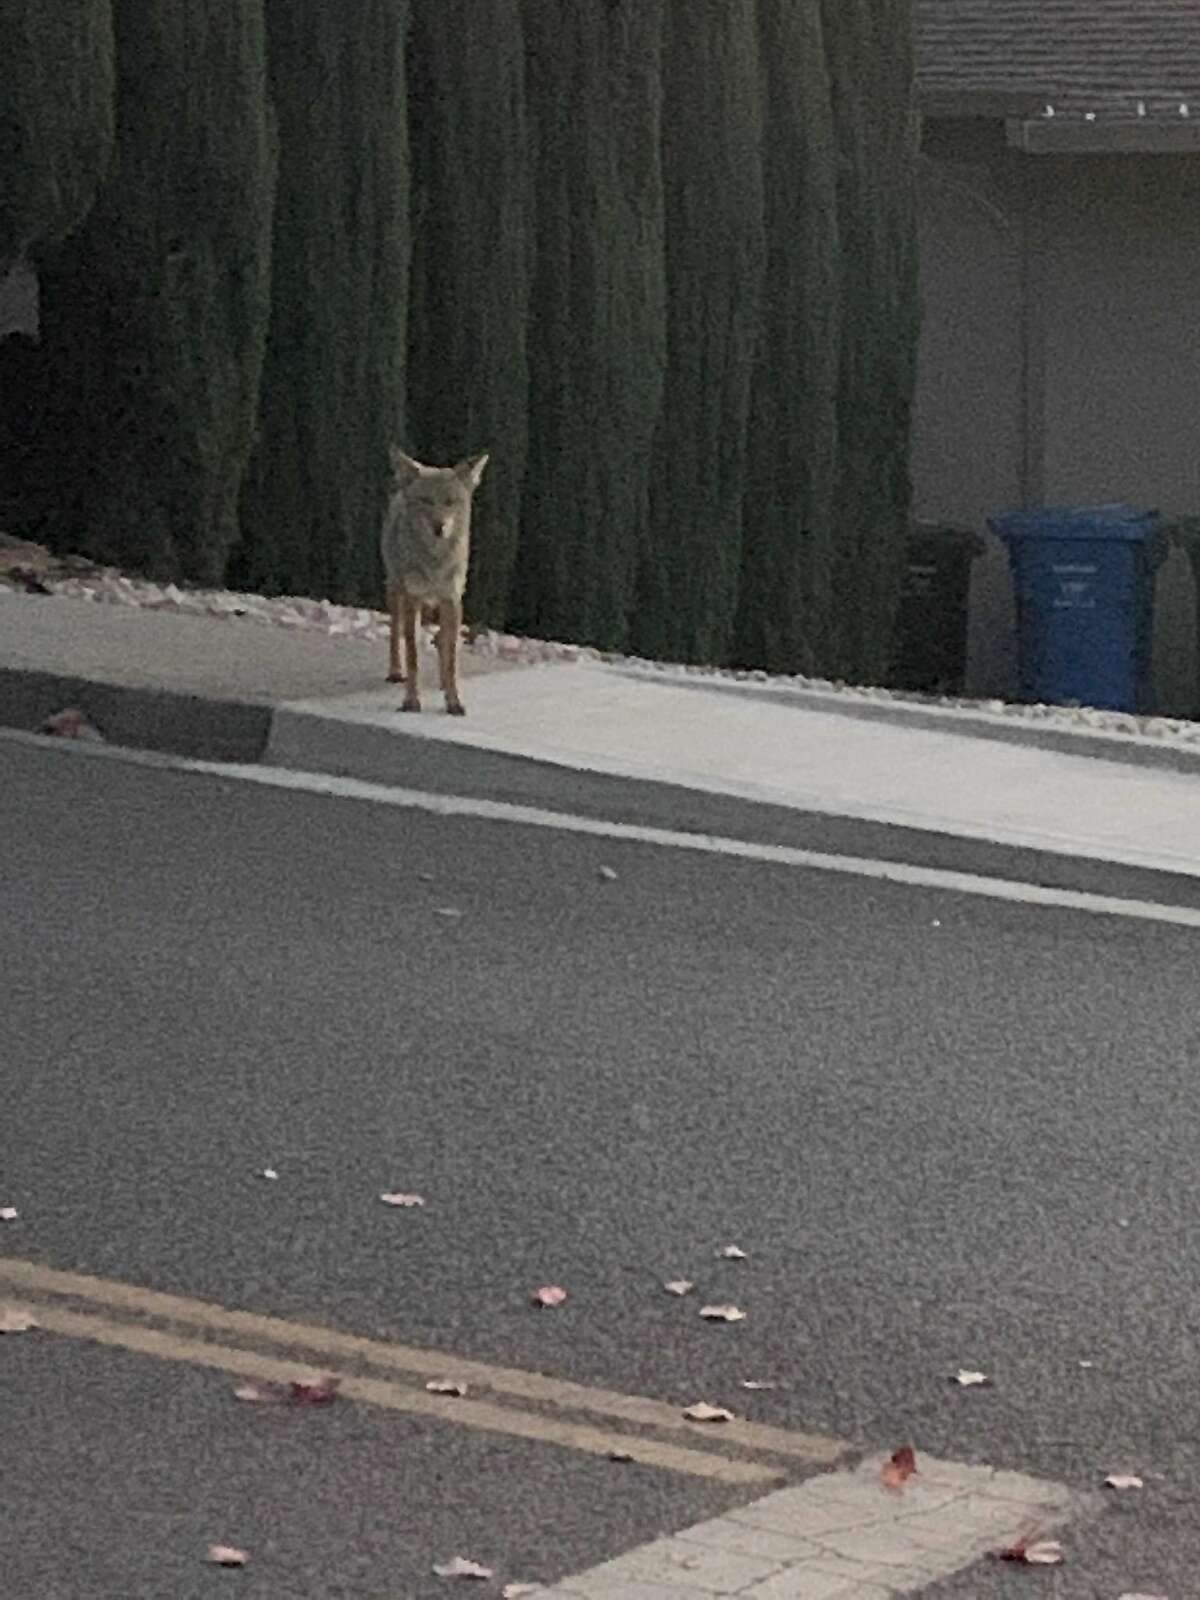 About 15 minutes after the Campolindo High attack, a neighbor said she was stalked by a coyote as she walked up Campolindo Drive nearby the school.